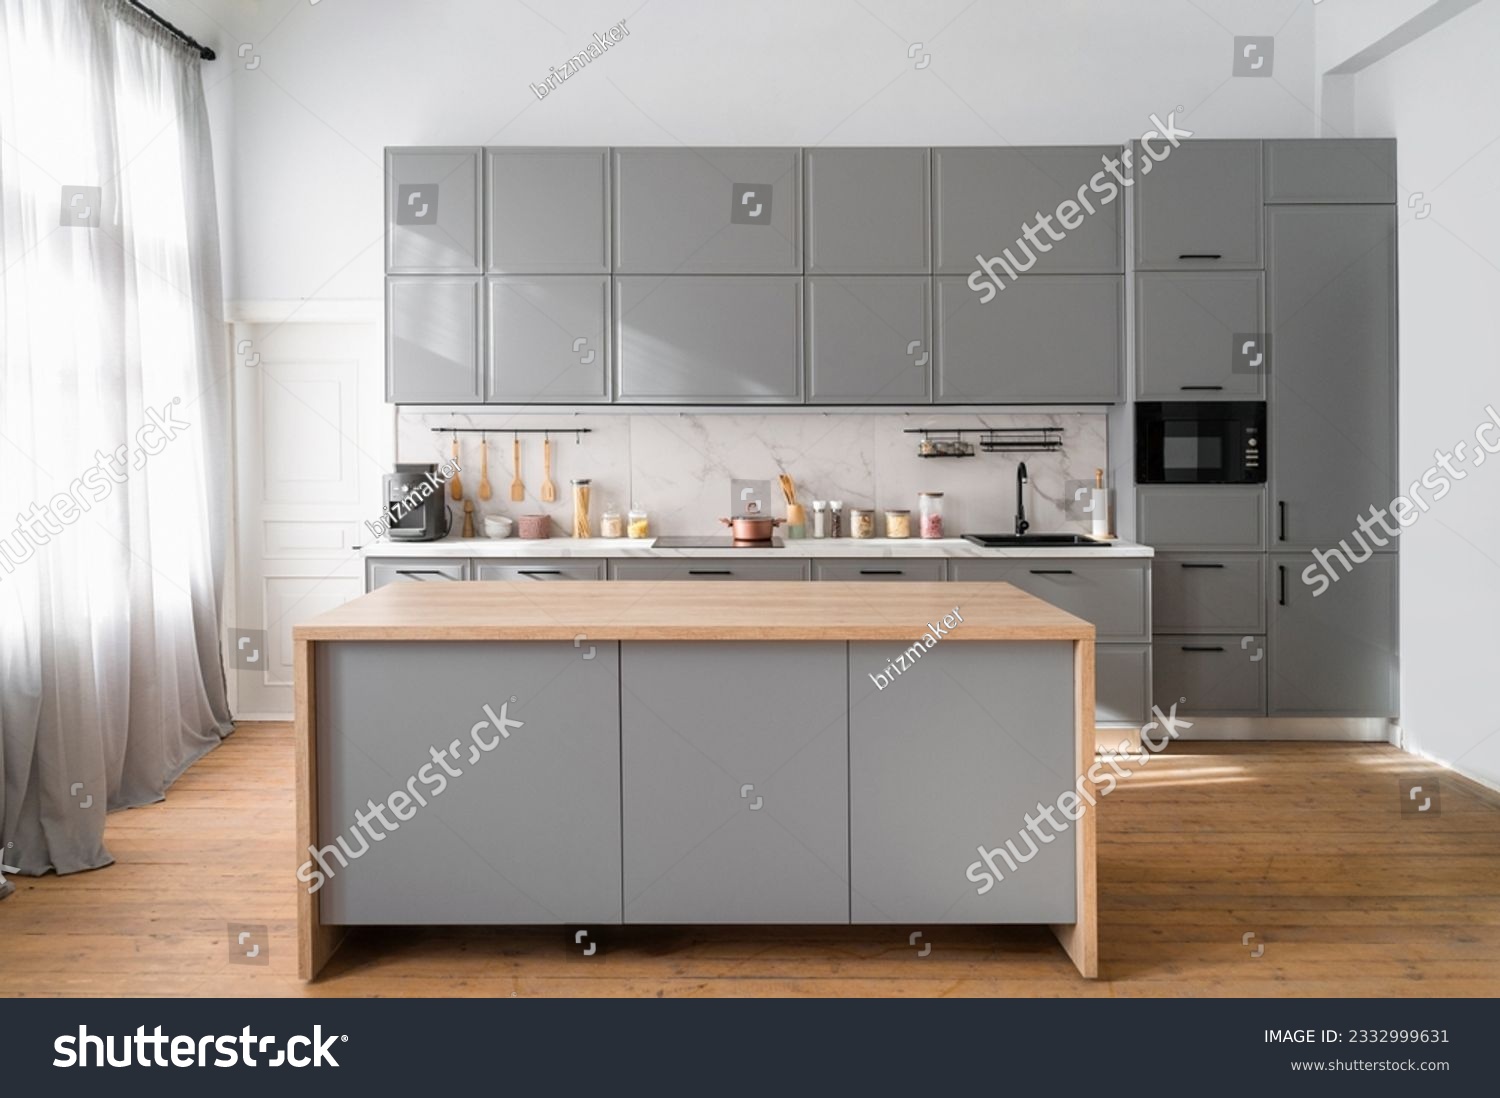 Bright minimalistic kitchen interior with gray furniture and big dining table on wooden floor. Cooking utensils and jars with food on countertop. #2332999631